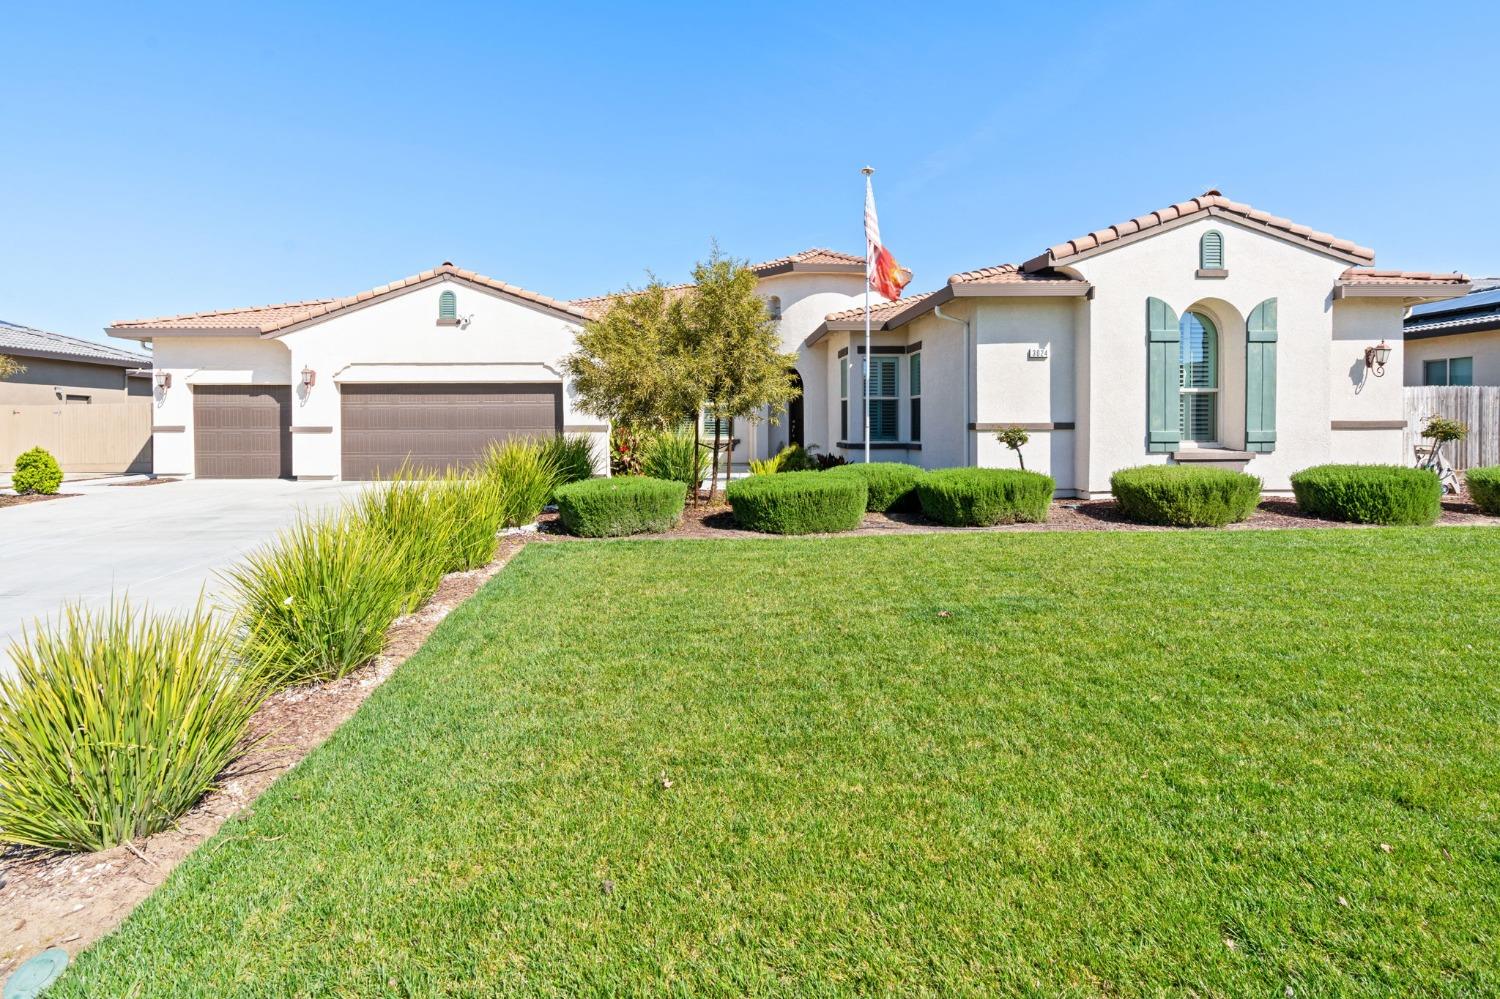 Photo of 3024 Seaside Ave in Tulare, CA